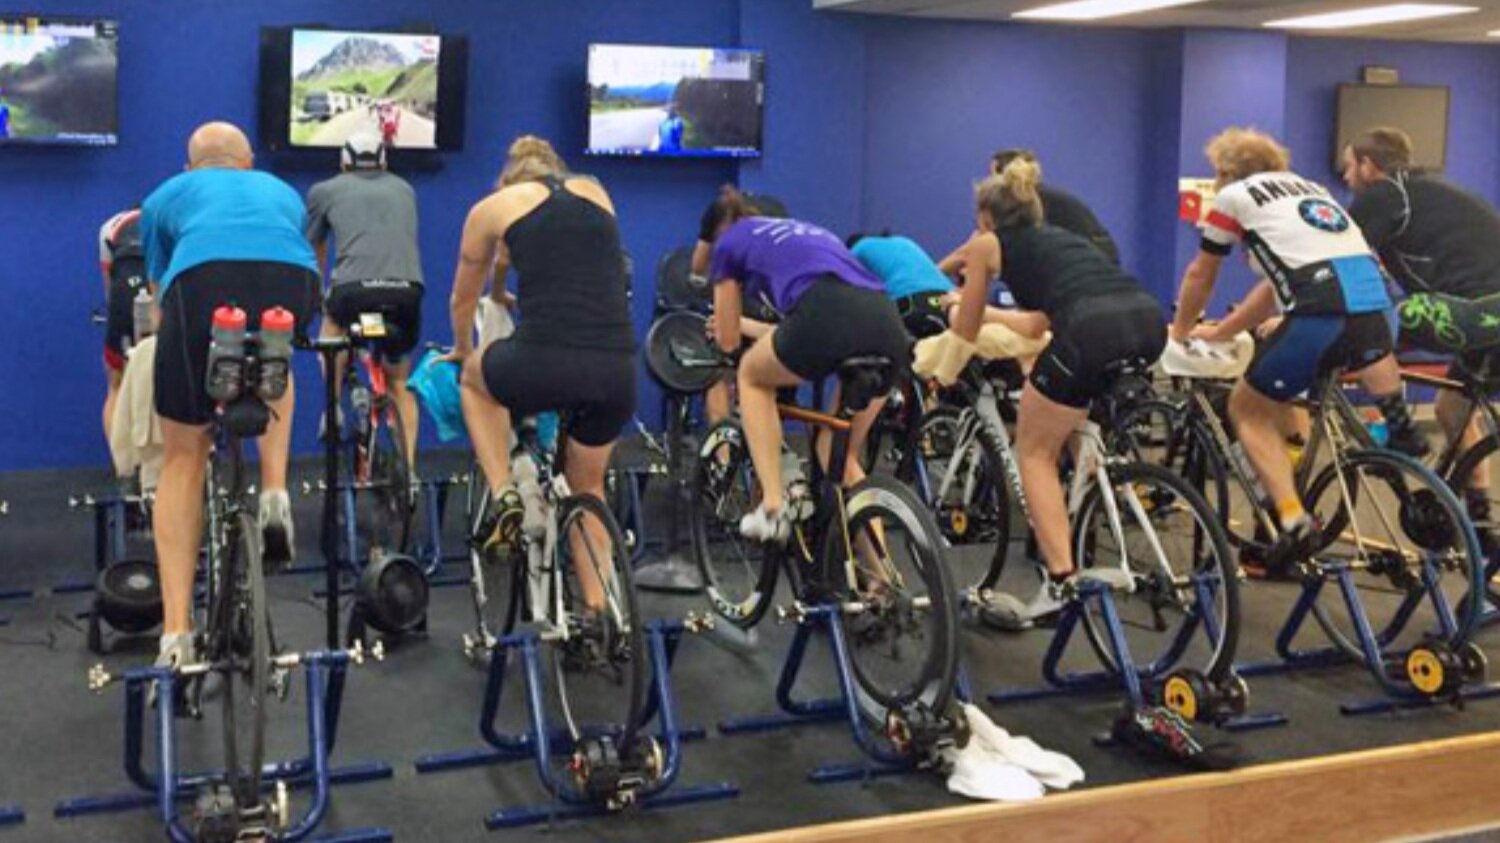 online cycling programs